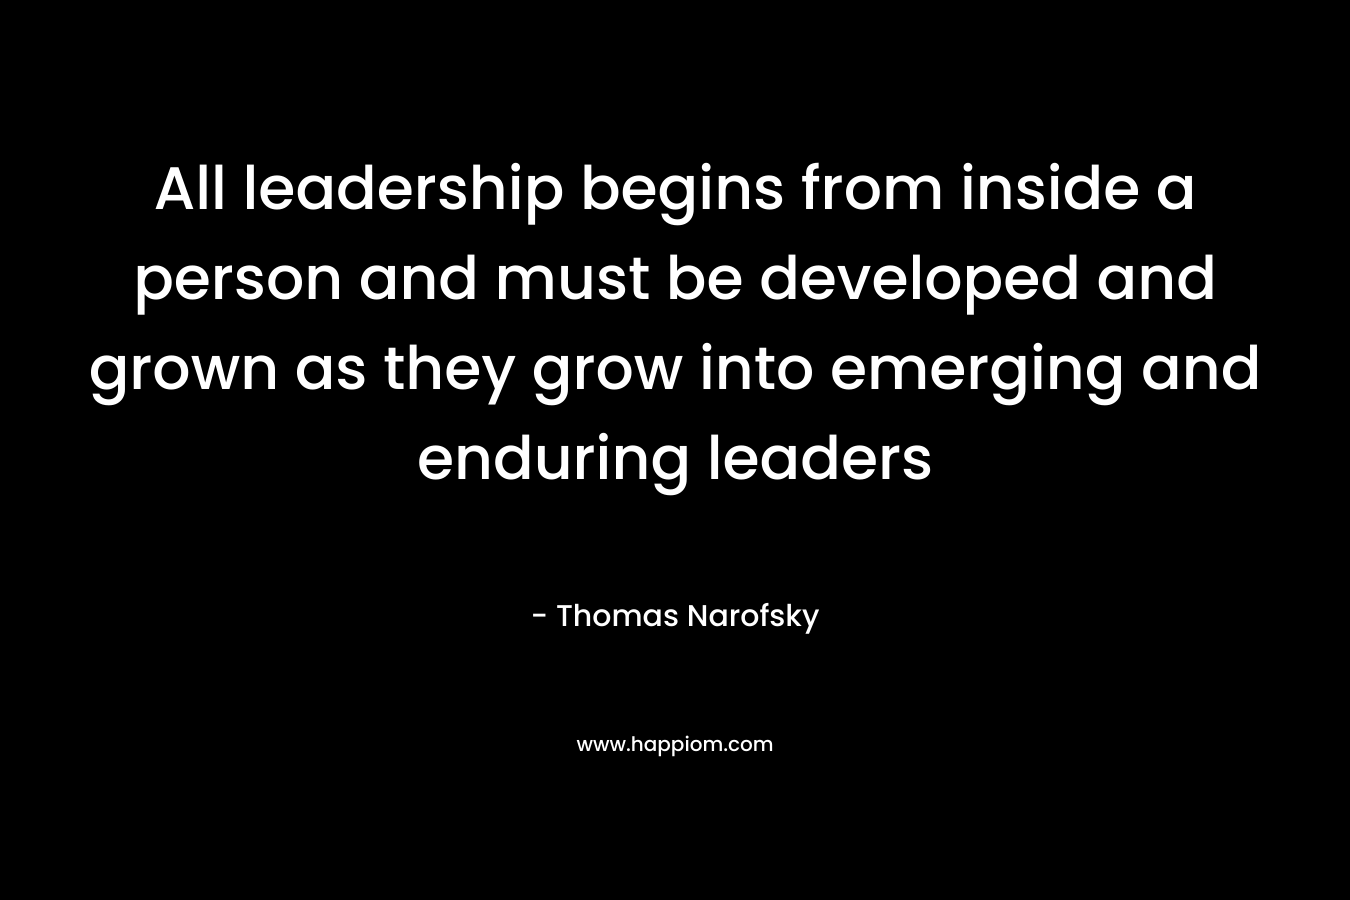 All leadership begins from inside a person and must be developed and grown as they grow into emerging and enduring leaders